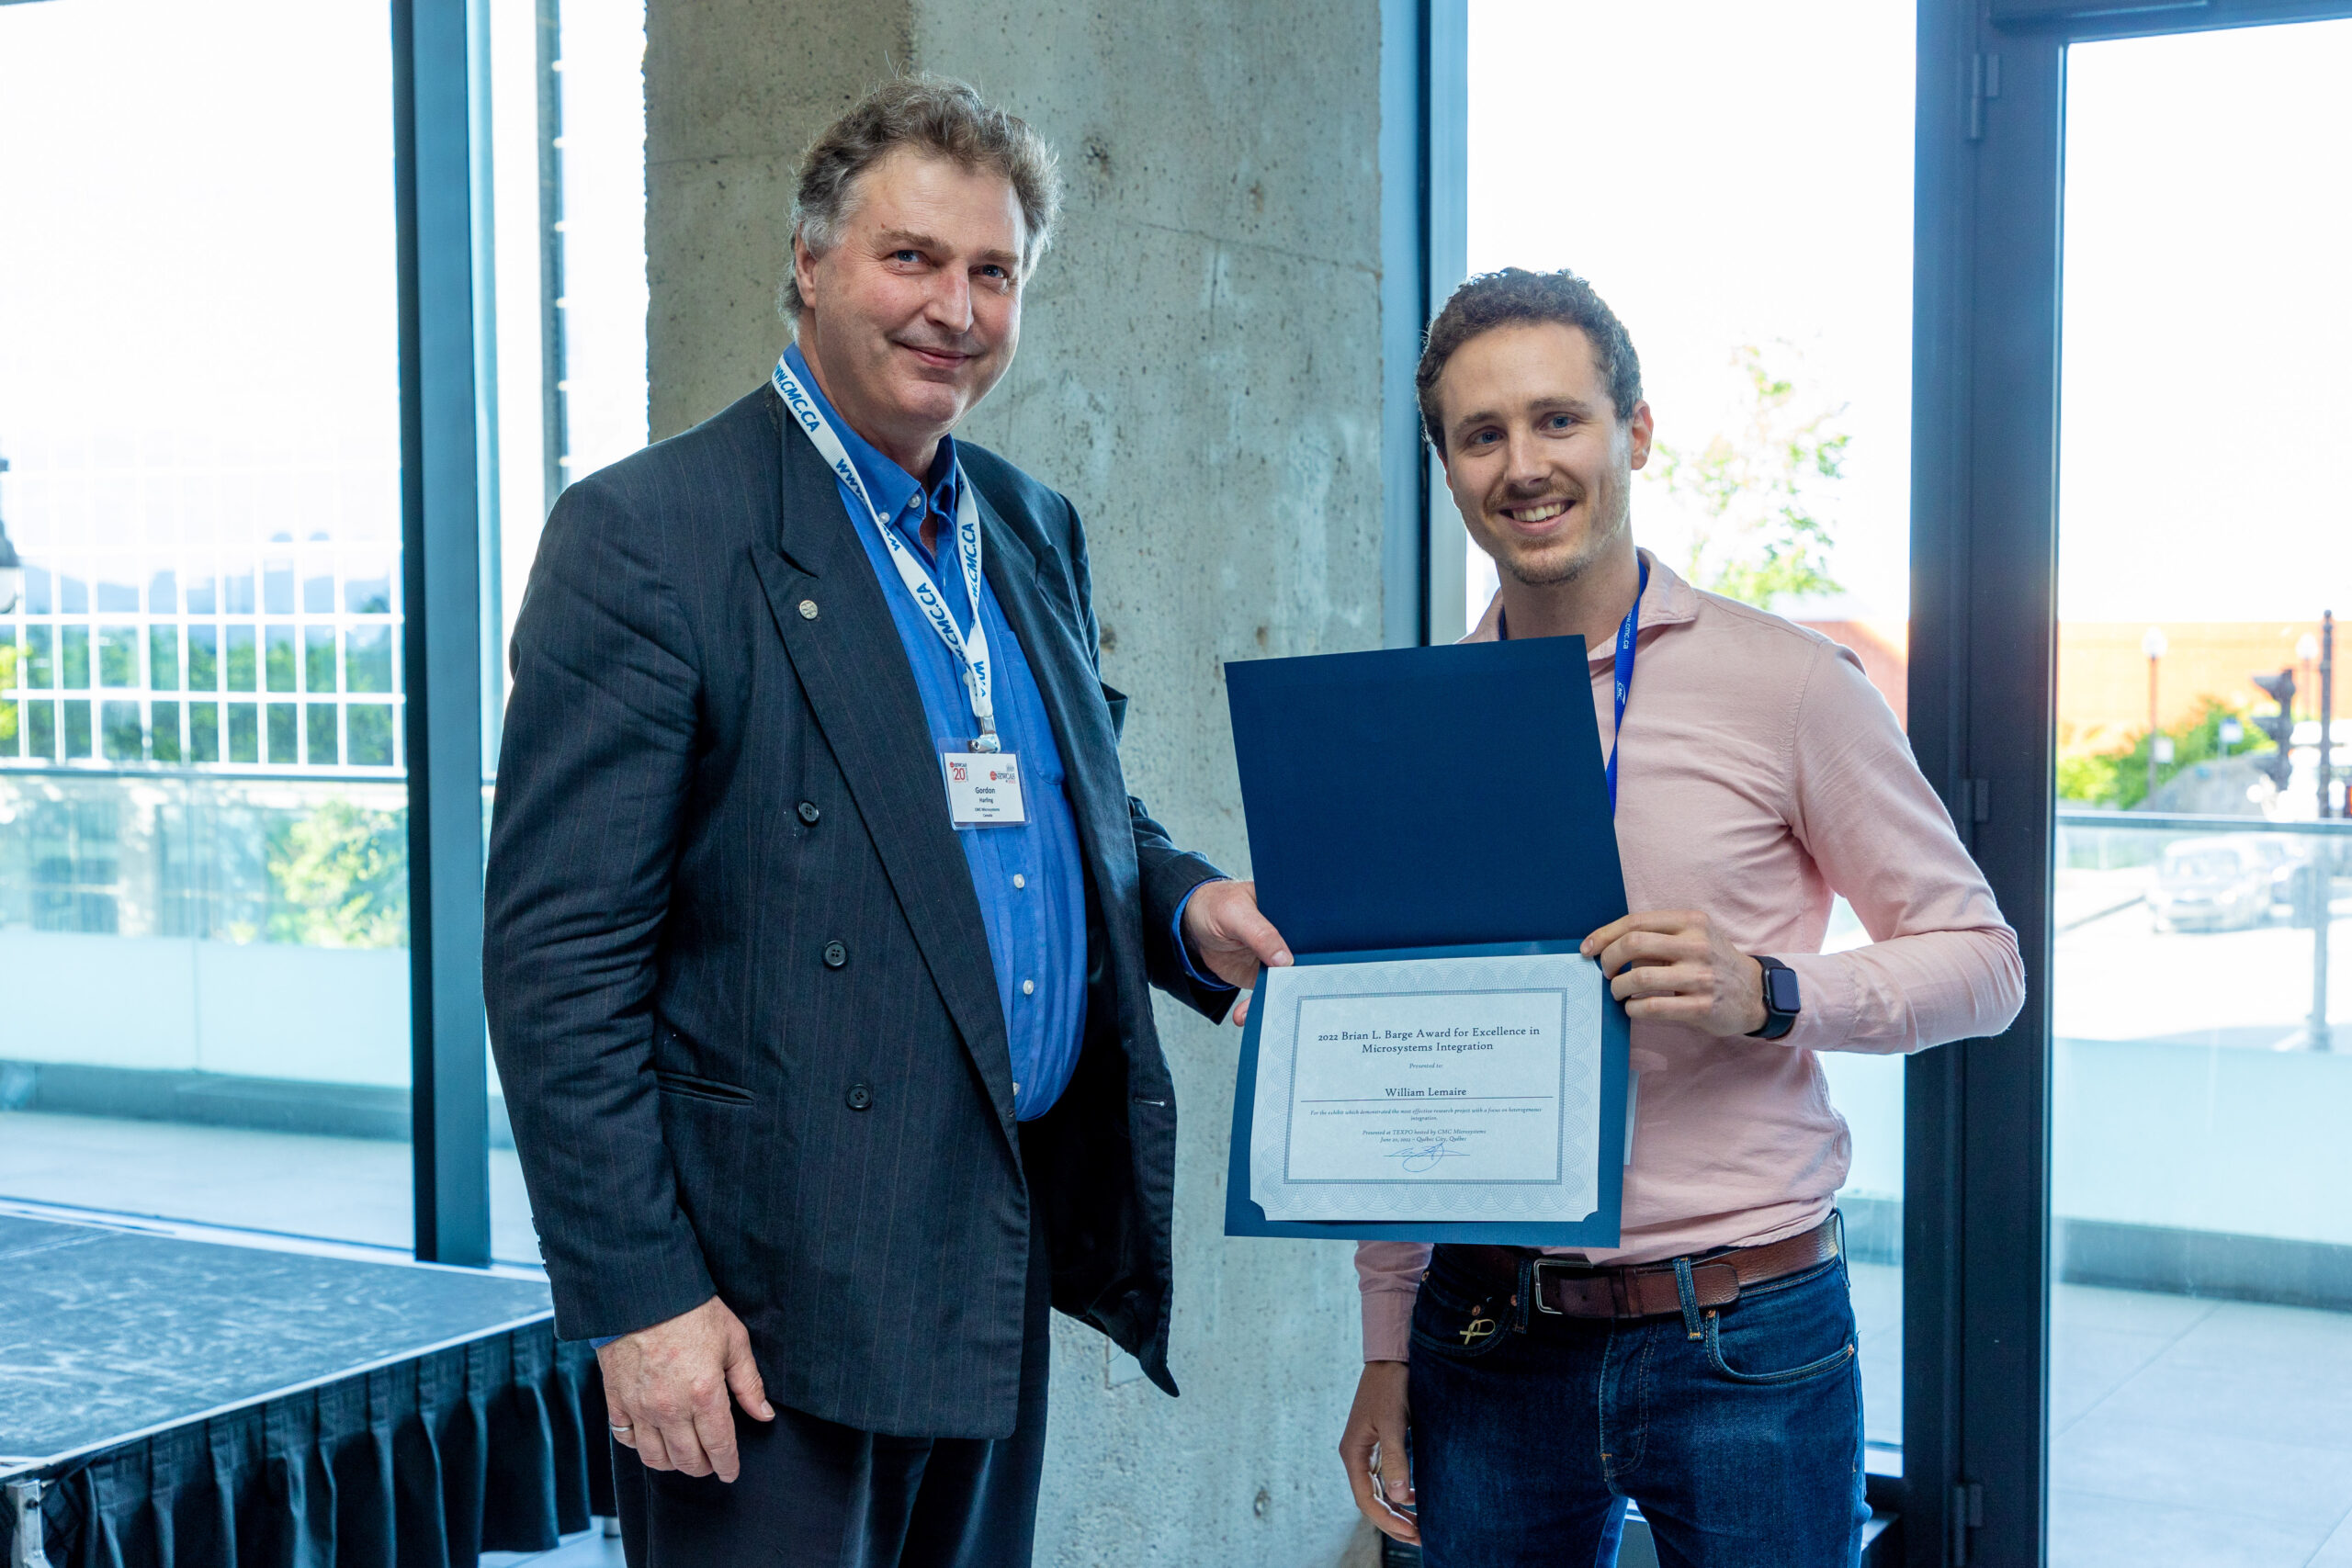 Brian L. Barge Award for Excelllence in Microsystems Innovation (William Lemaire, Universite de Sherbrooke)